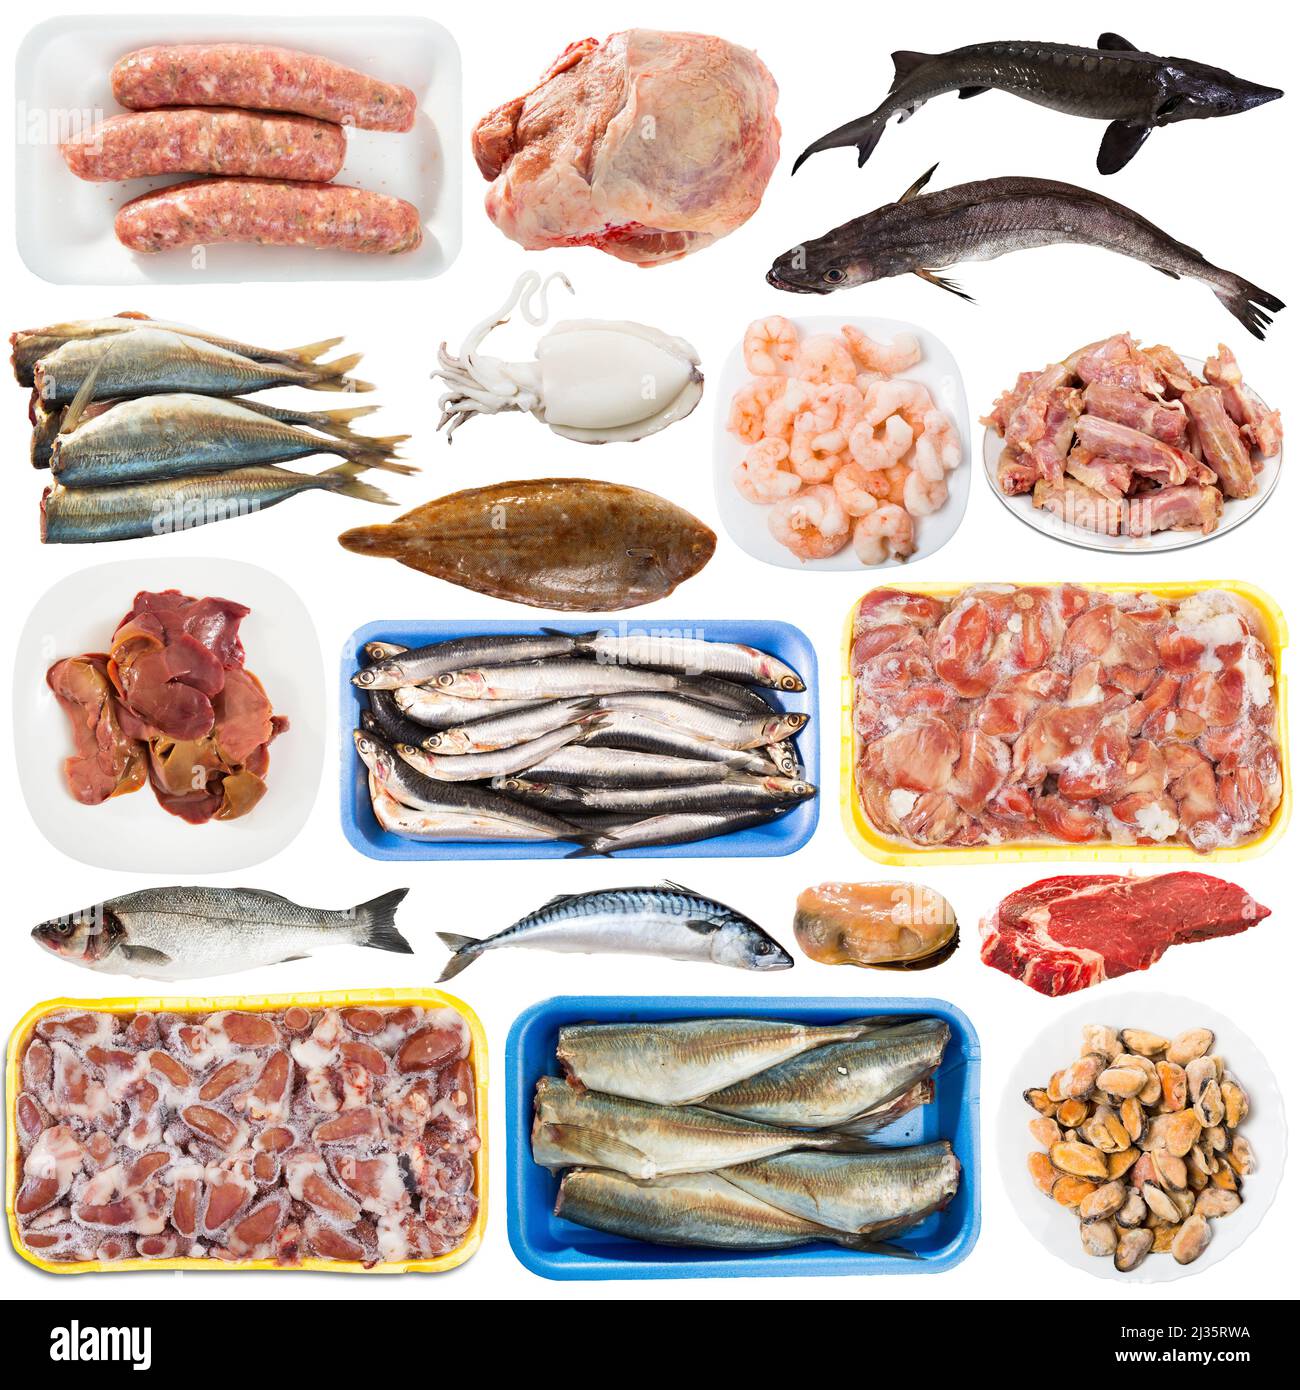 Assortment of raw meat and seafood Stock Photo